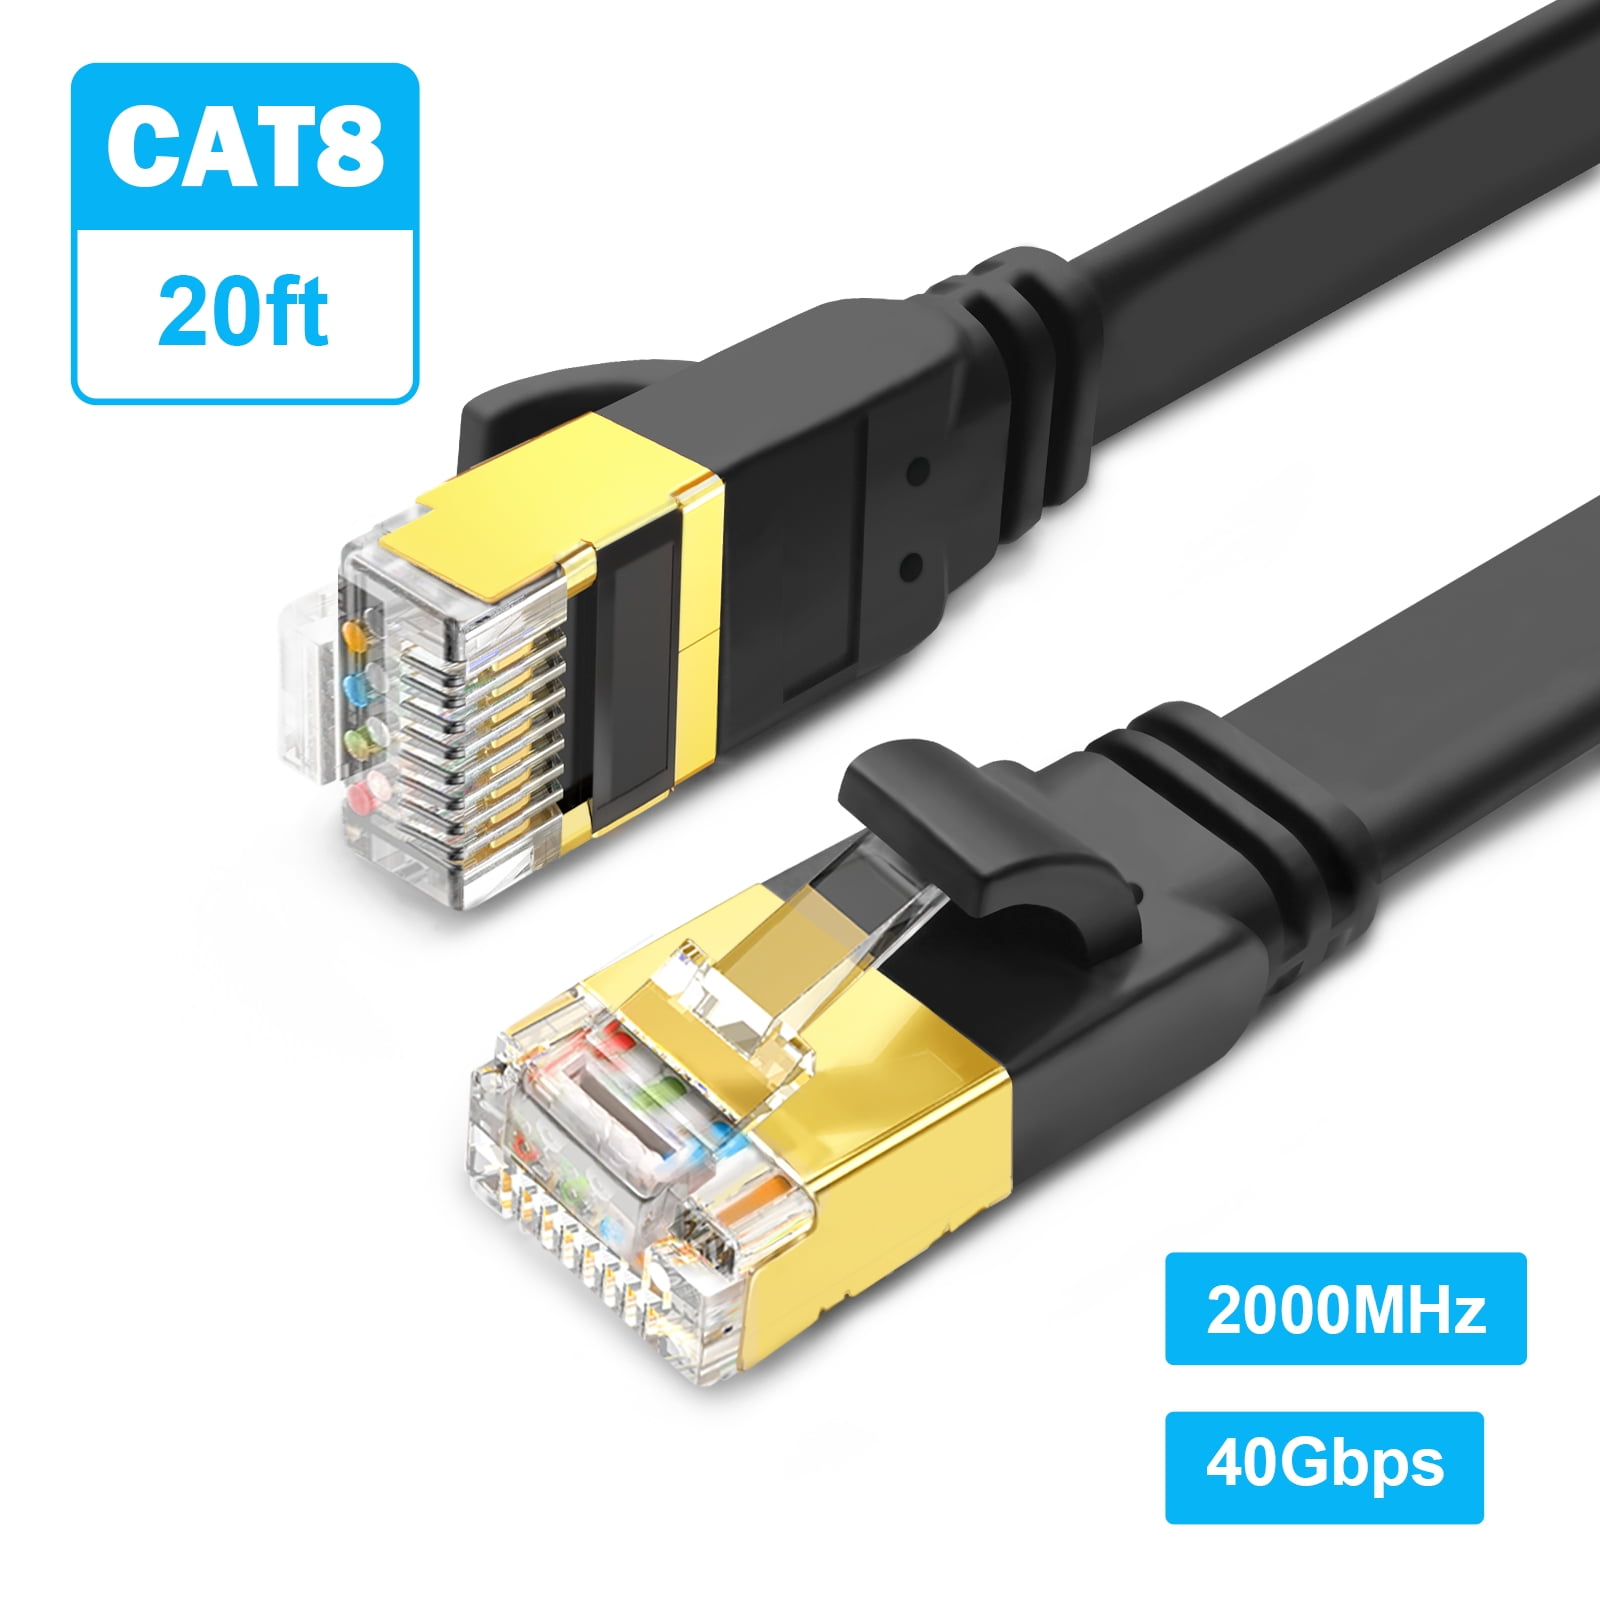 UGREEN Cat 8 Ethernet Cable 3FT, 40Gbps 2000Mhz Cat8 Internet